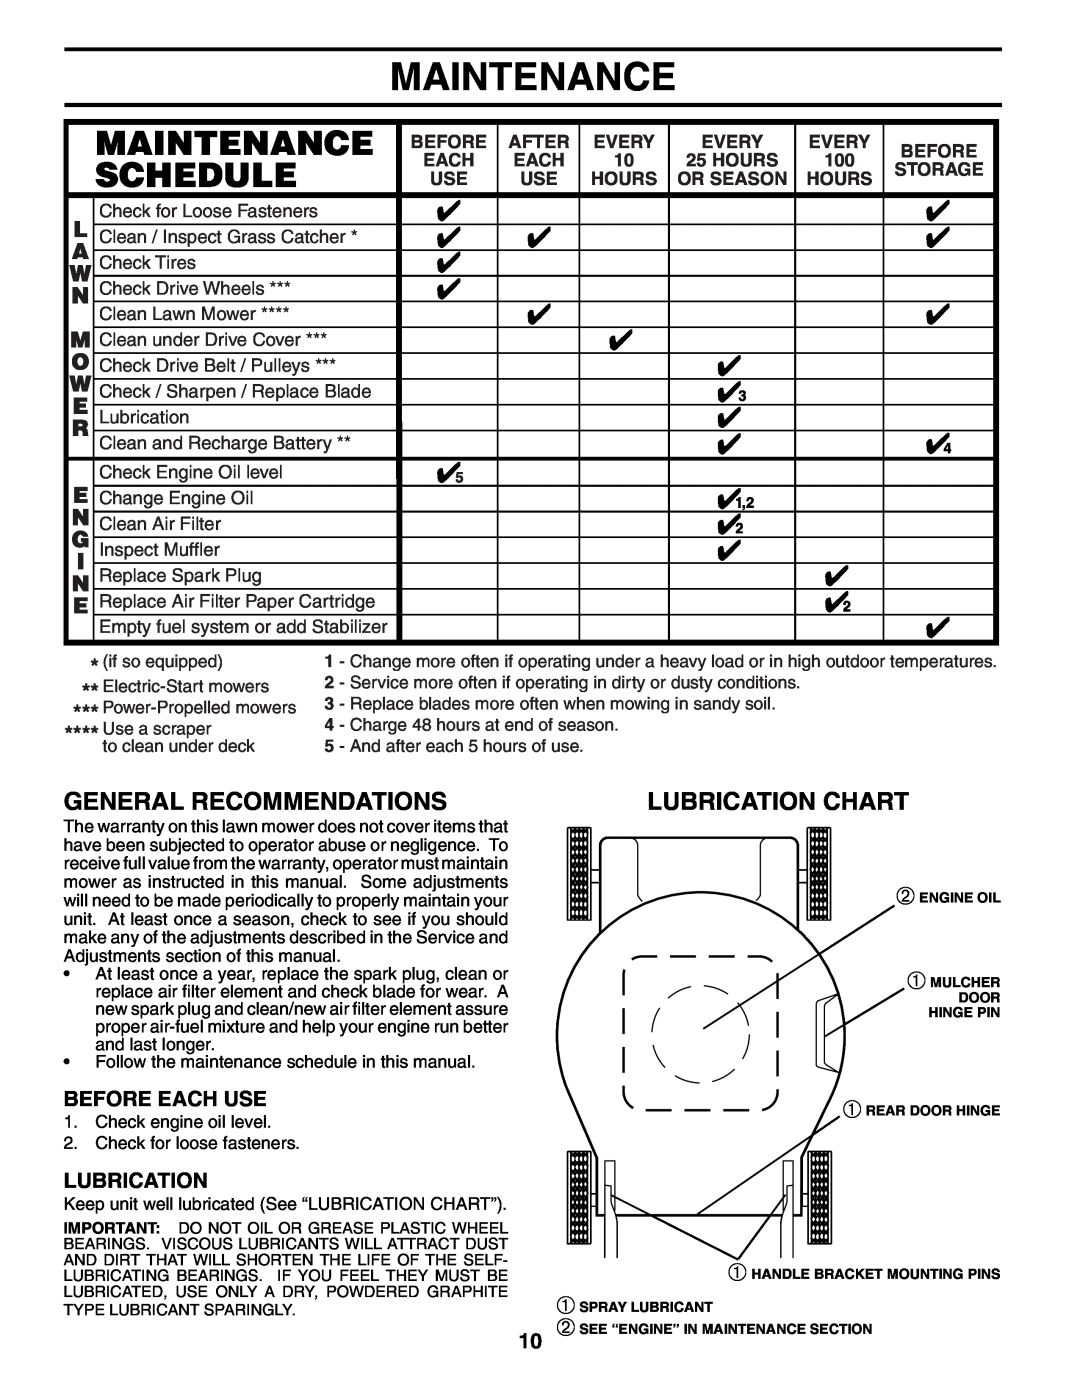 Husqvarna 7021RS Maintenance, General Recommendations, Lubrication Chart, Before Each Use, After, Every, Hours, Storage 